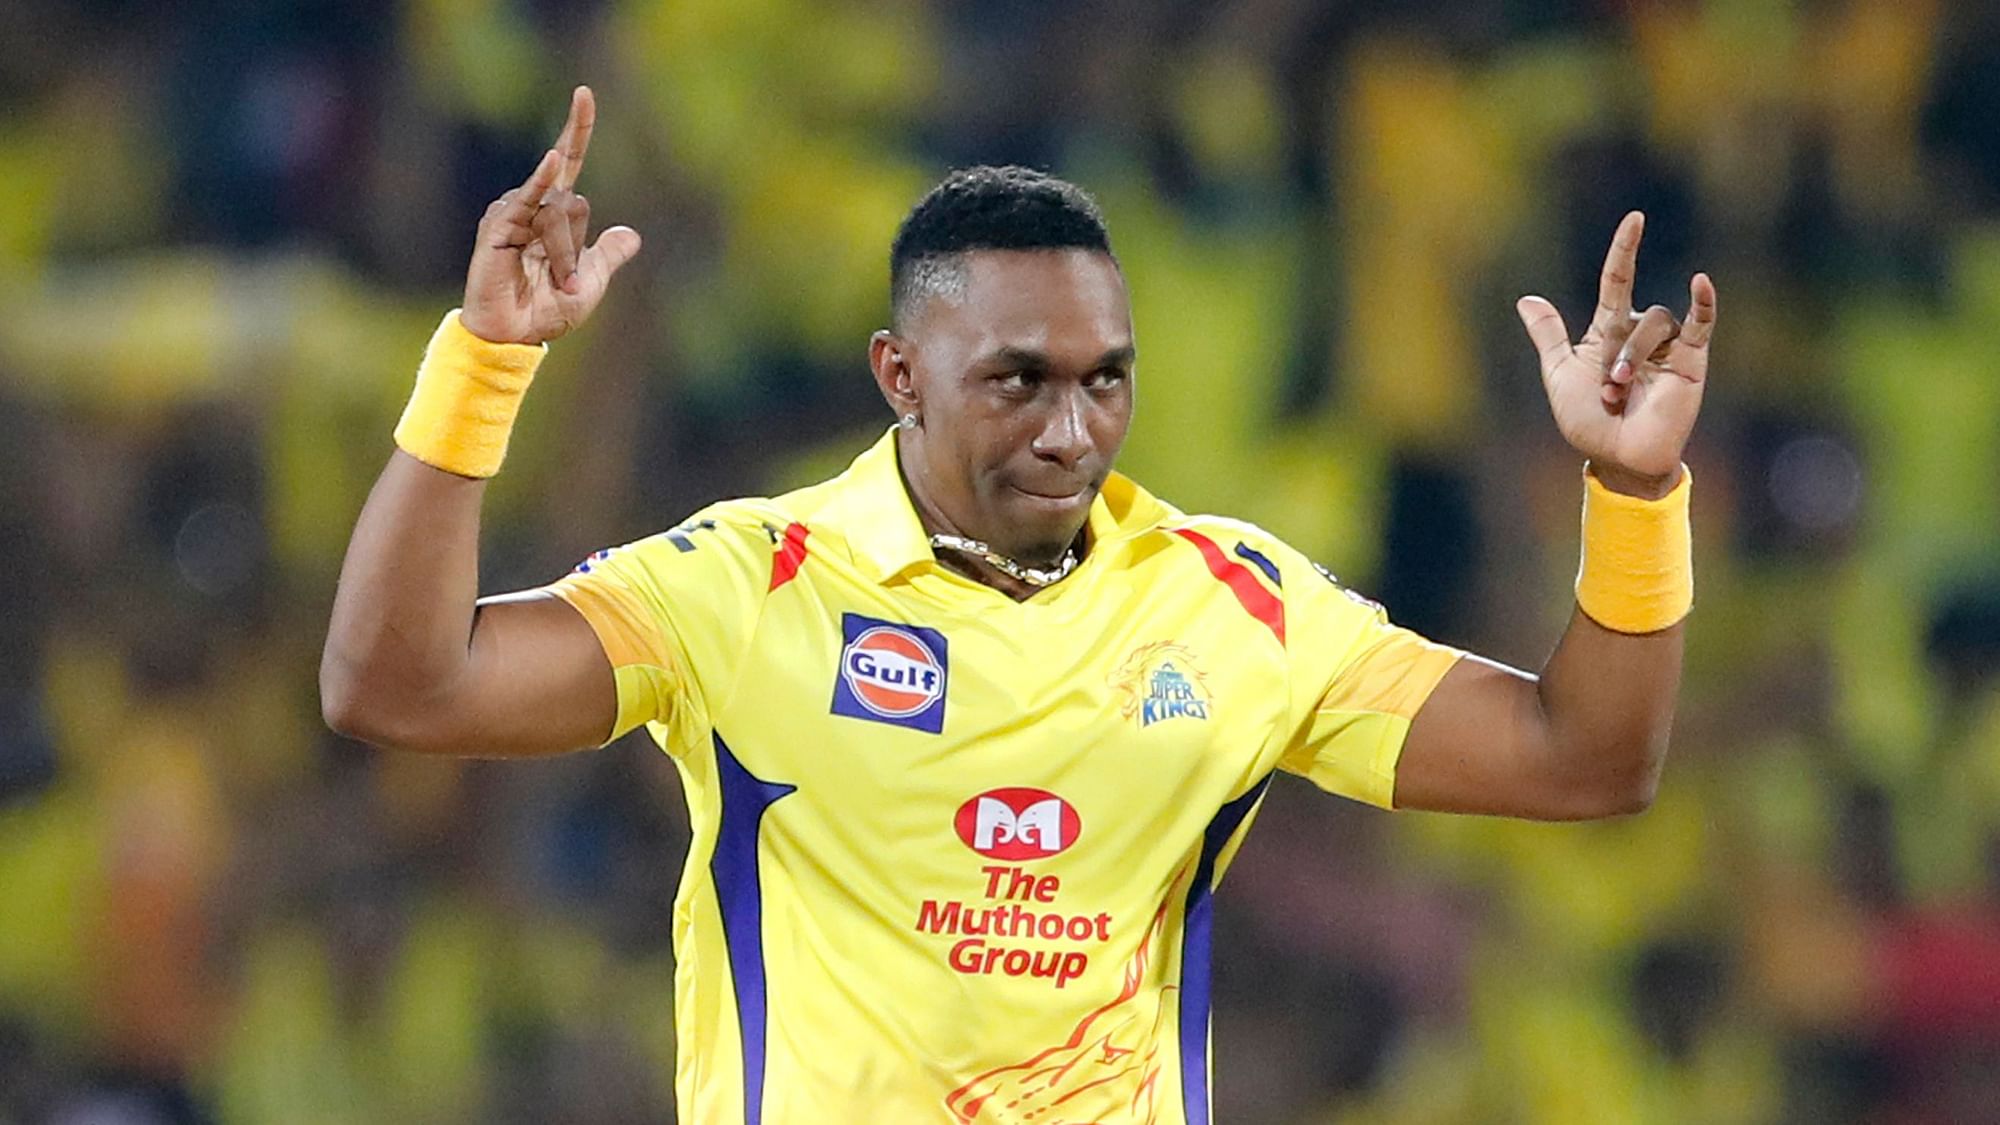 West Indies all-rounder Dwayne Bravo on Friday announced his return to international cricket.